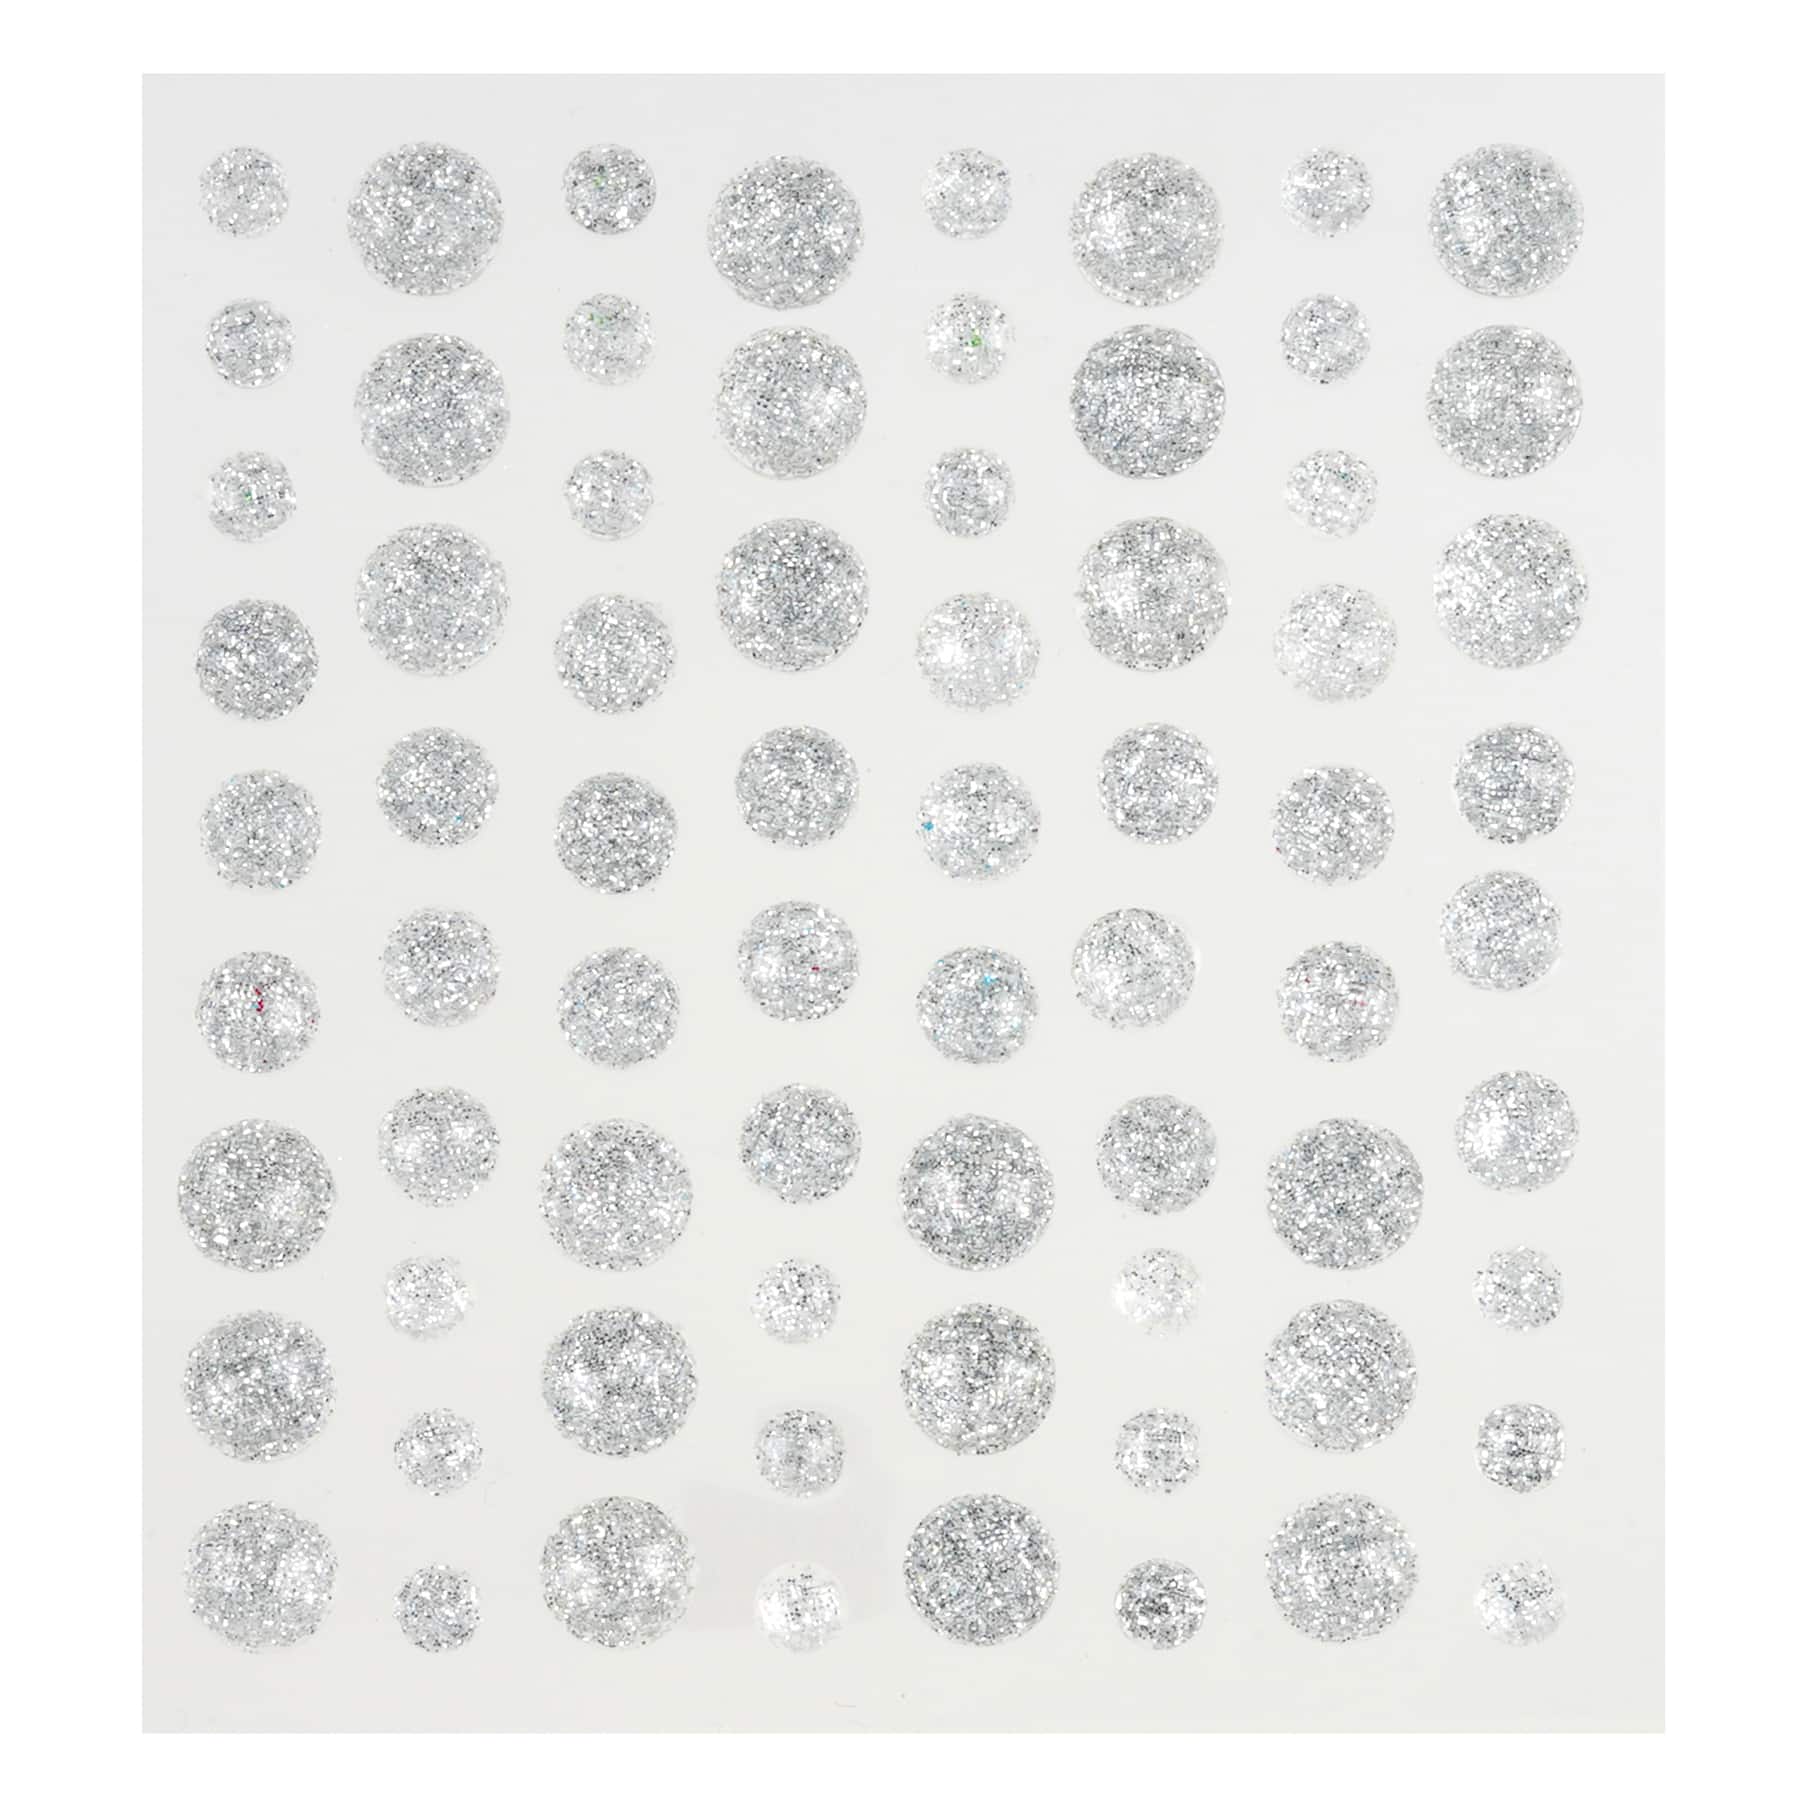 Jewel Bling Gemstone Stickers by Recollections™